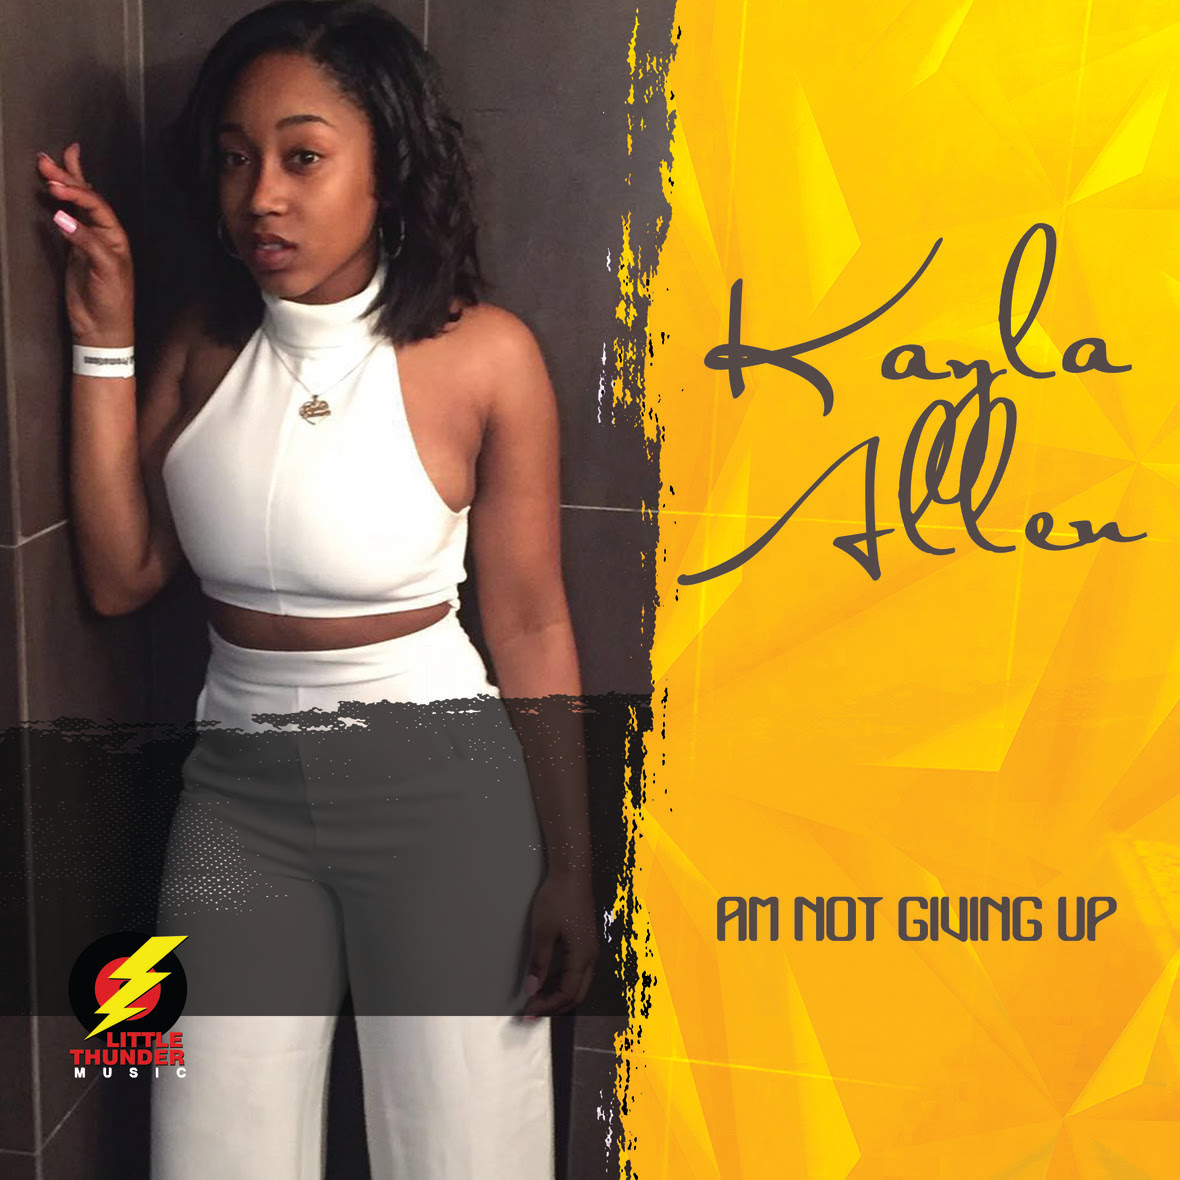 Kayla Allen Makes Her Signing Debut With Not Giving Up